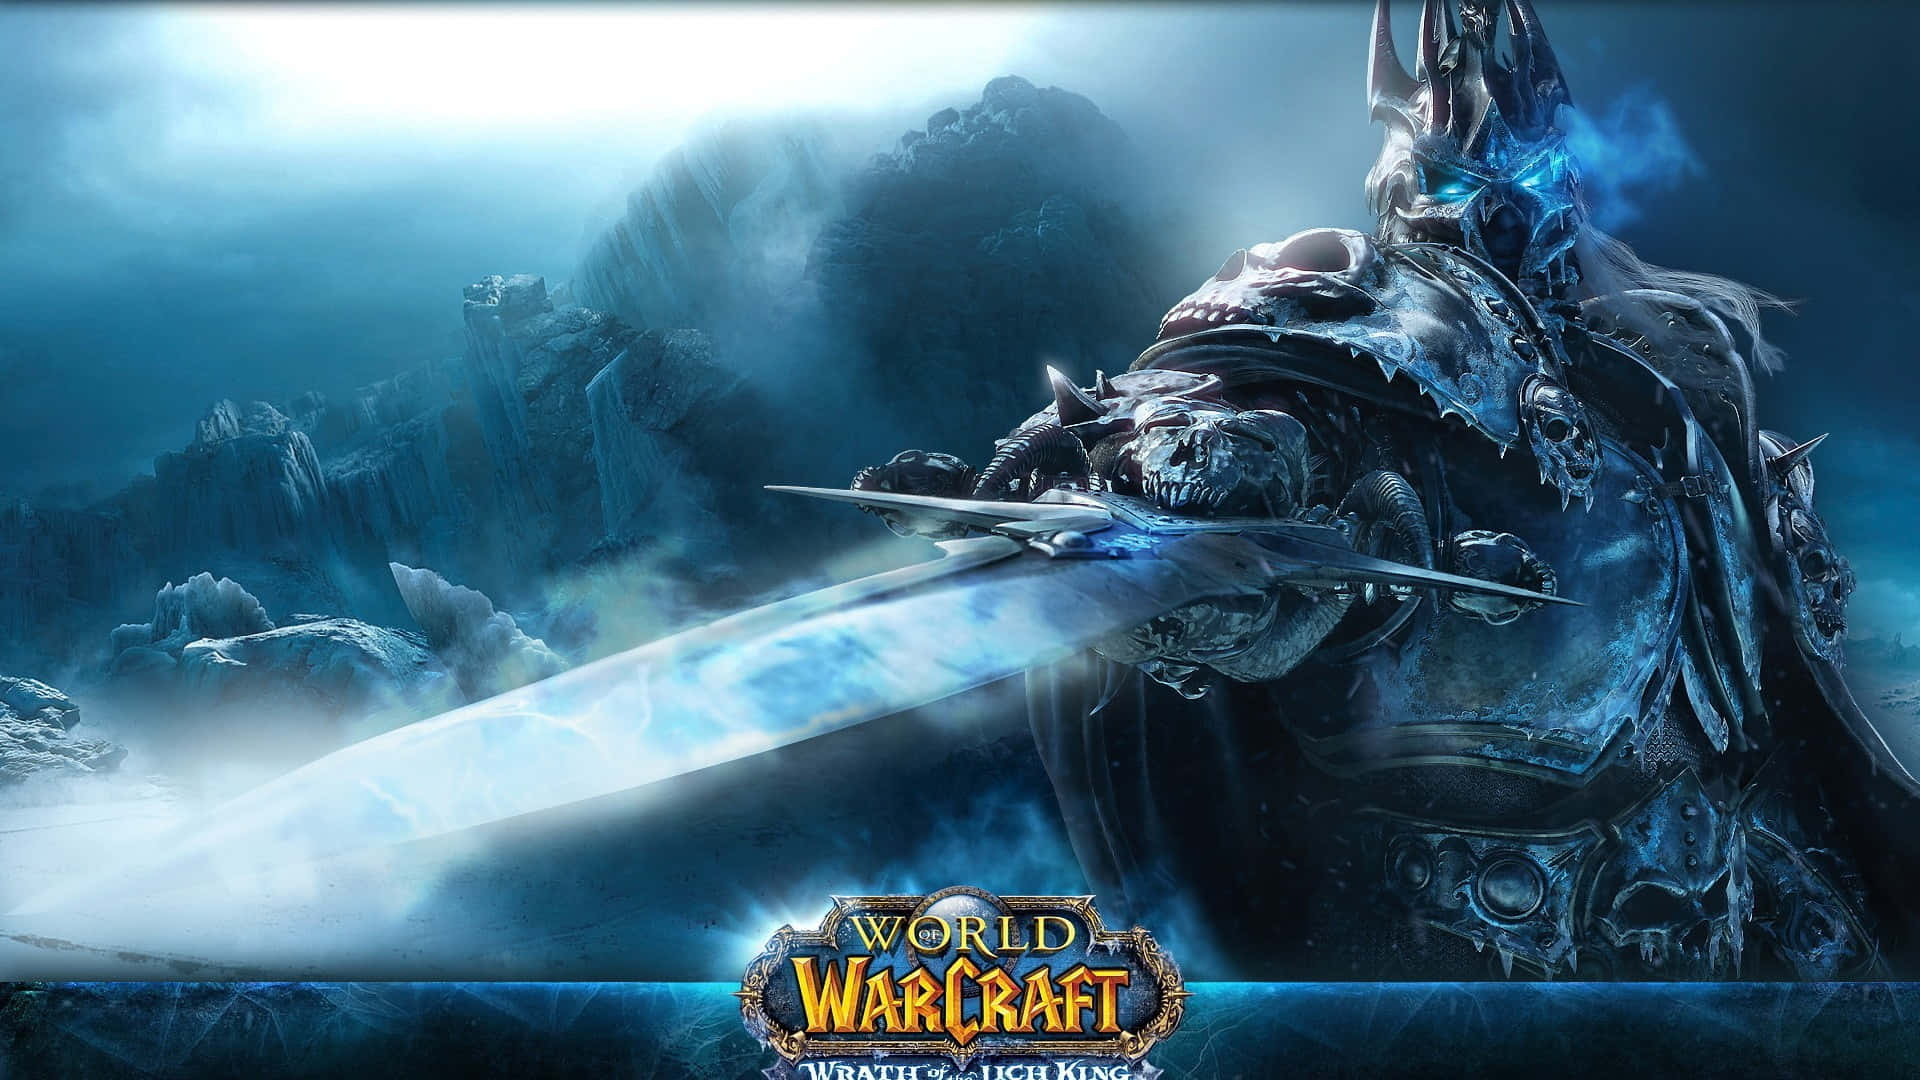 Explore the world of Azeroth in World of WarCraft Wallpaper